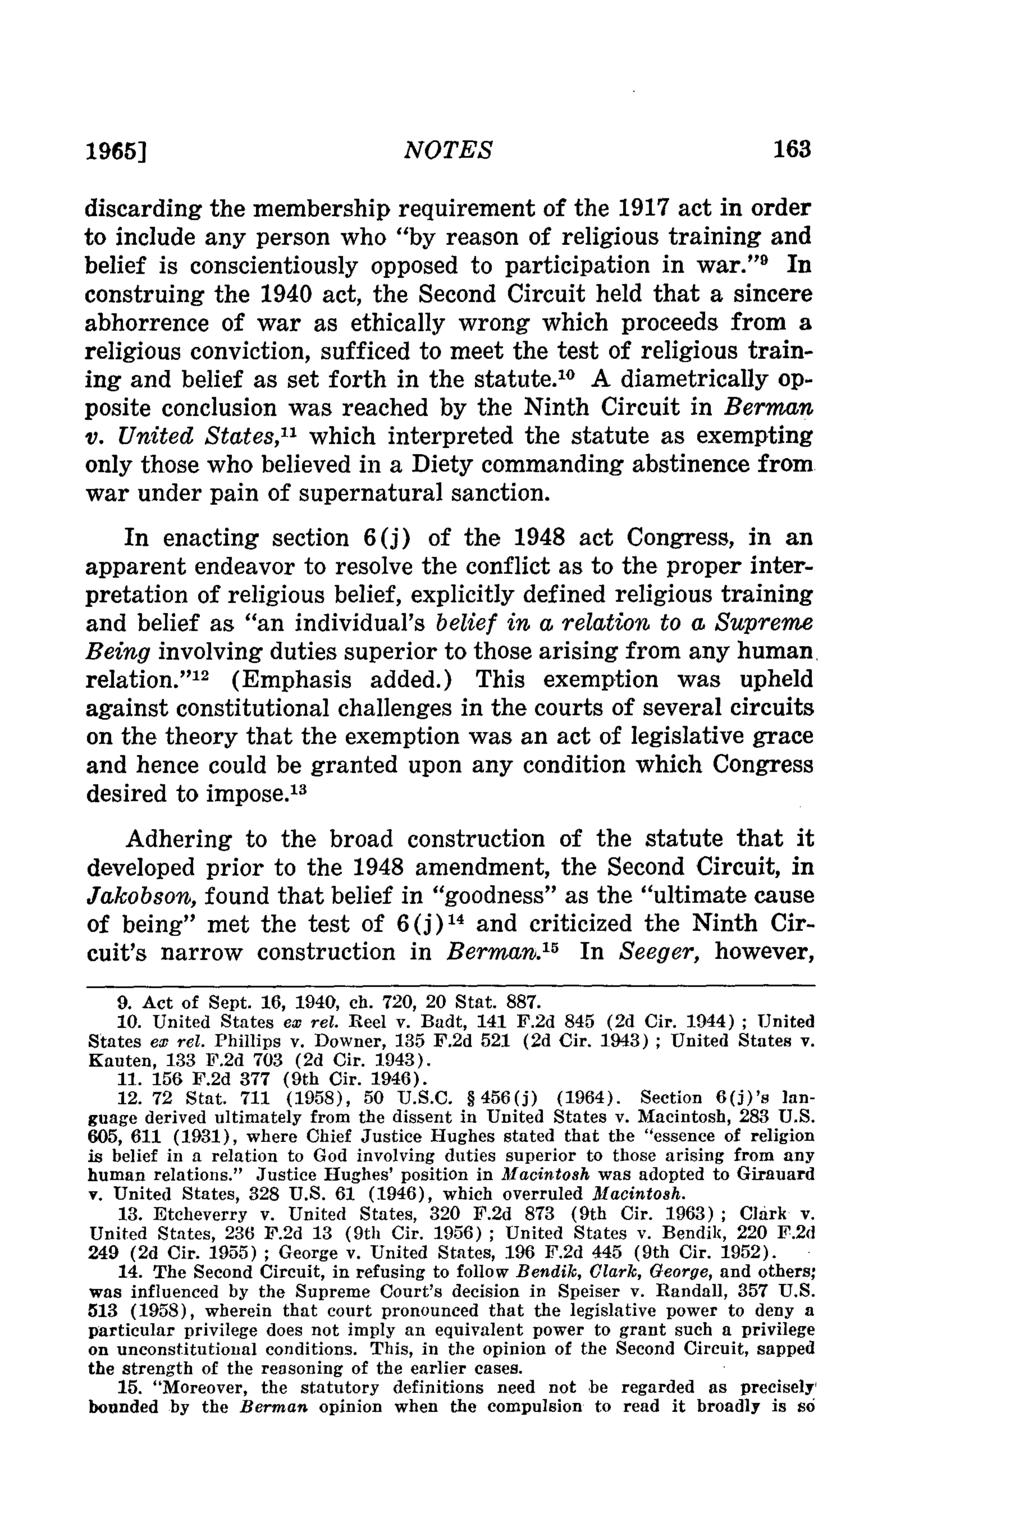 1965] NOTES discarding the membership requirement of the 1917 act in order to include any person who "by reason of religious training and belief is conscientiously opposed to participation in war.